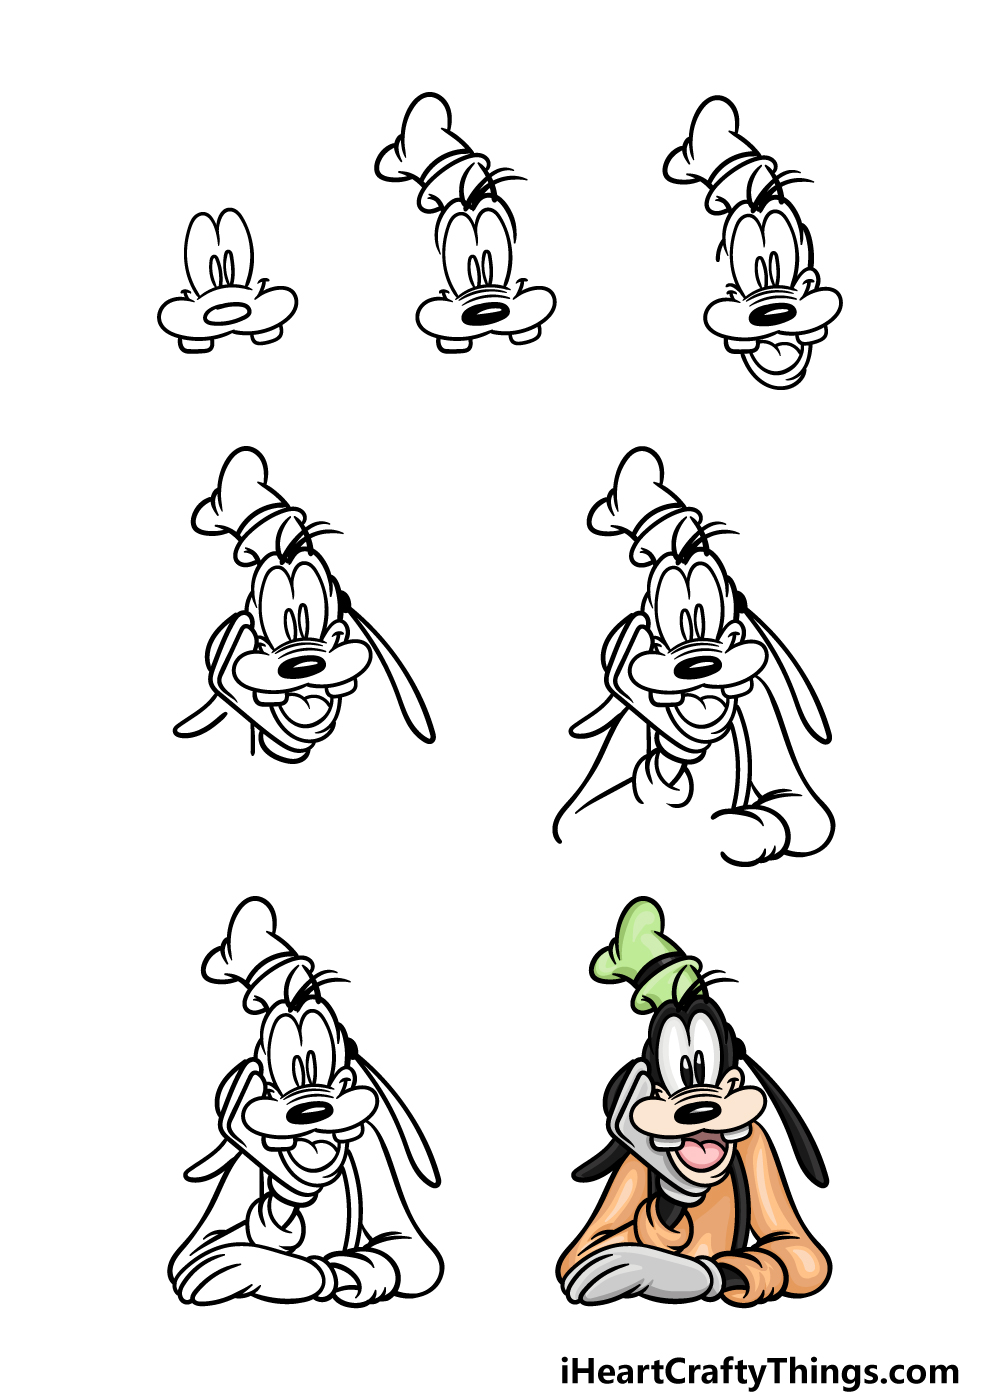 how to draw Goofy in 7 steps